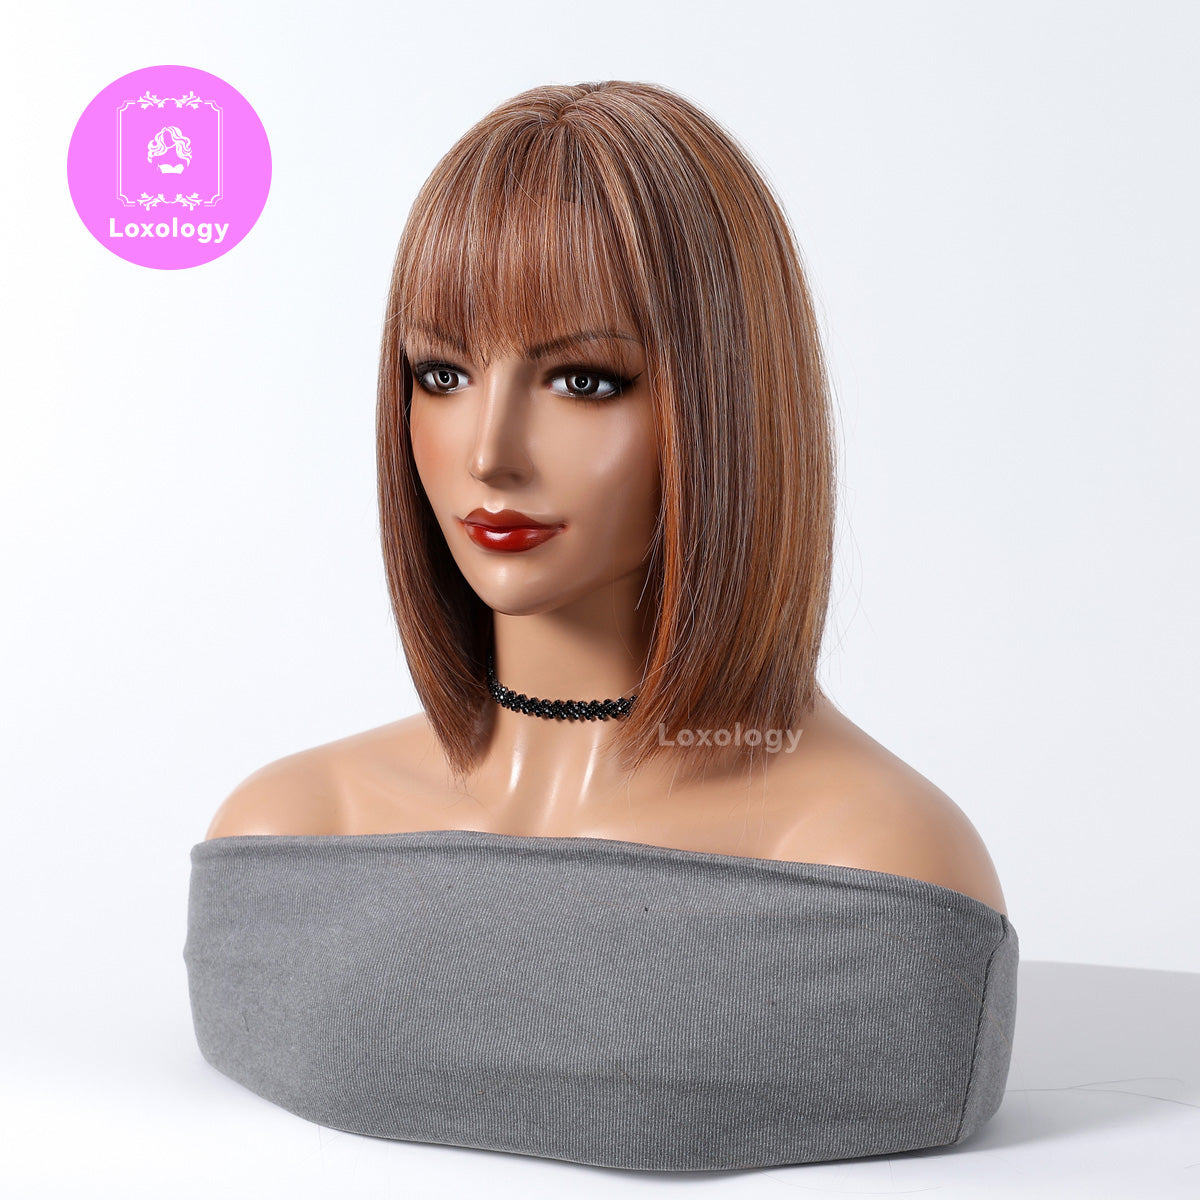 【Ember】Loxology | 14 Inch Straight Brown and Blonde mixed with Bangs Synthetic Wigs